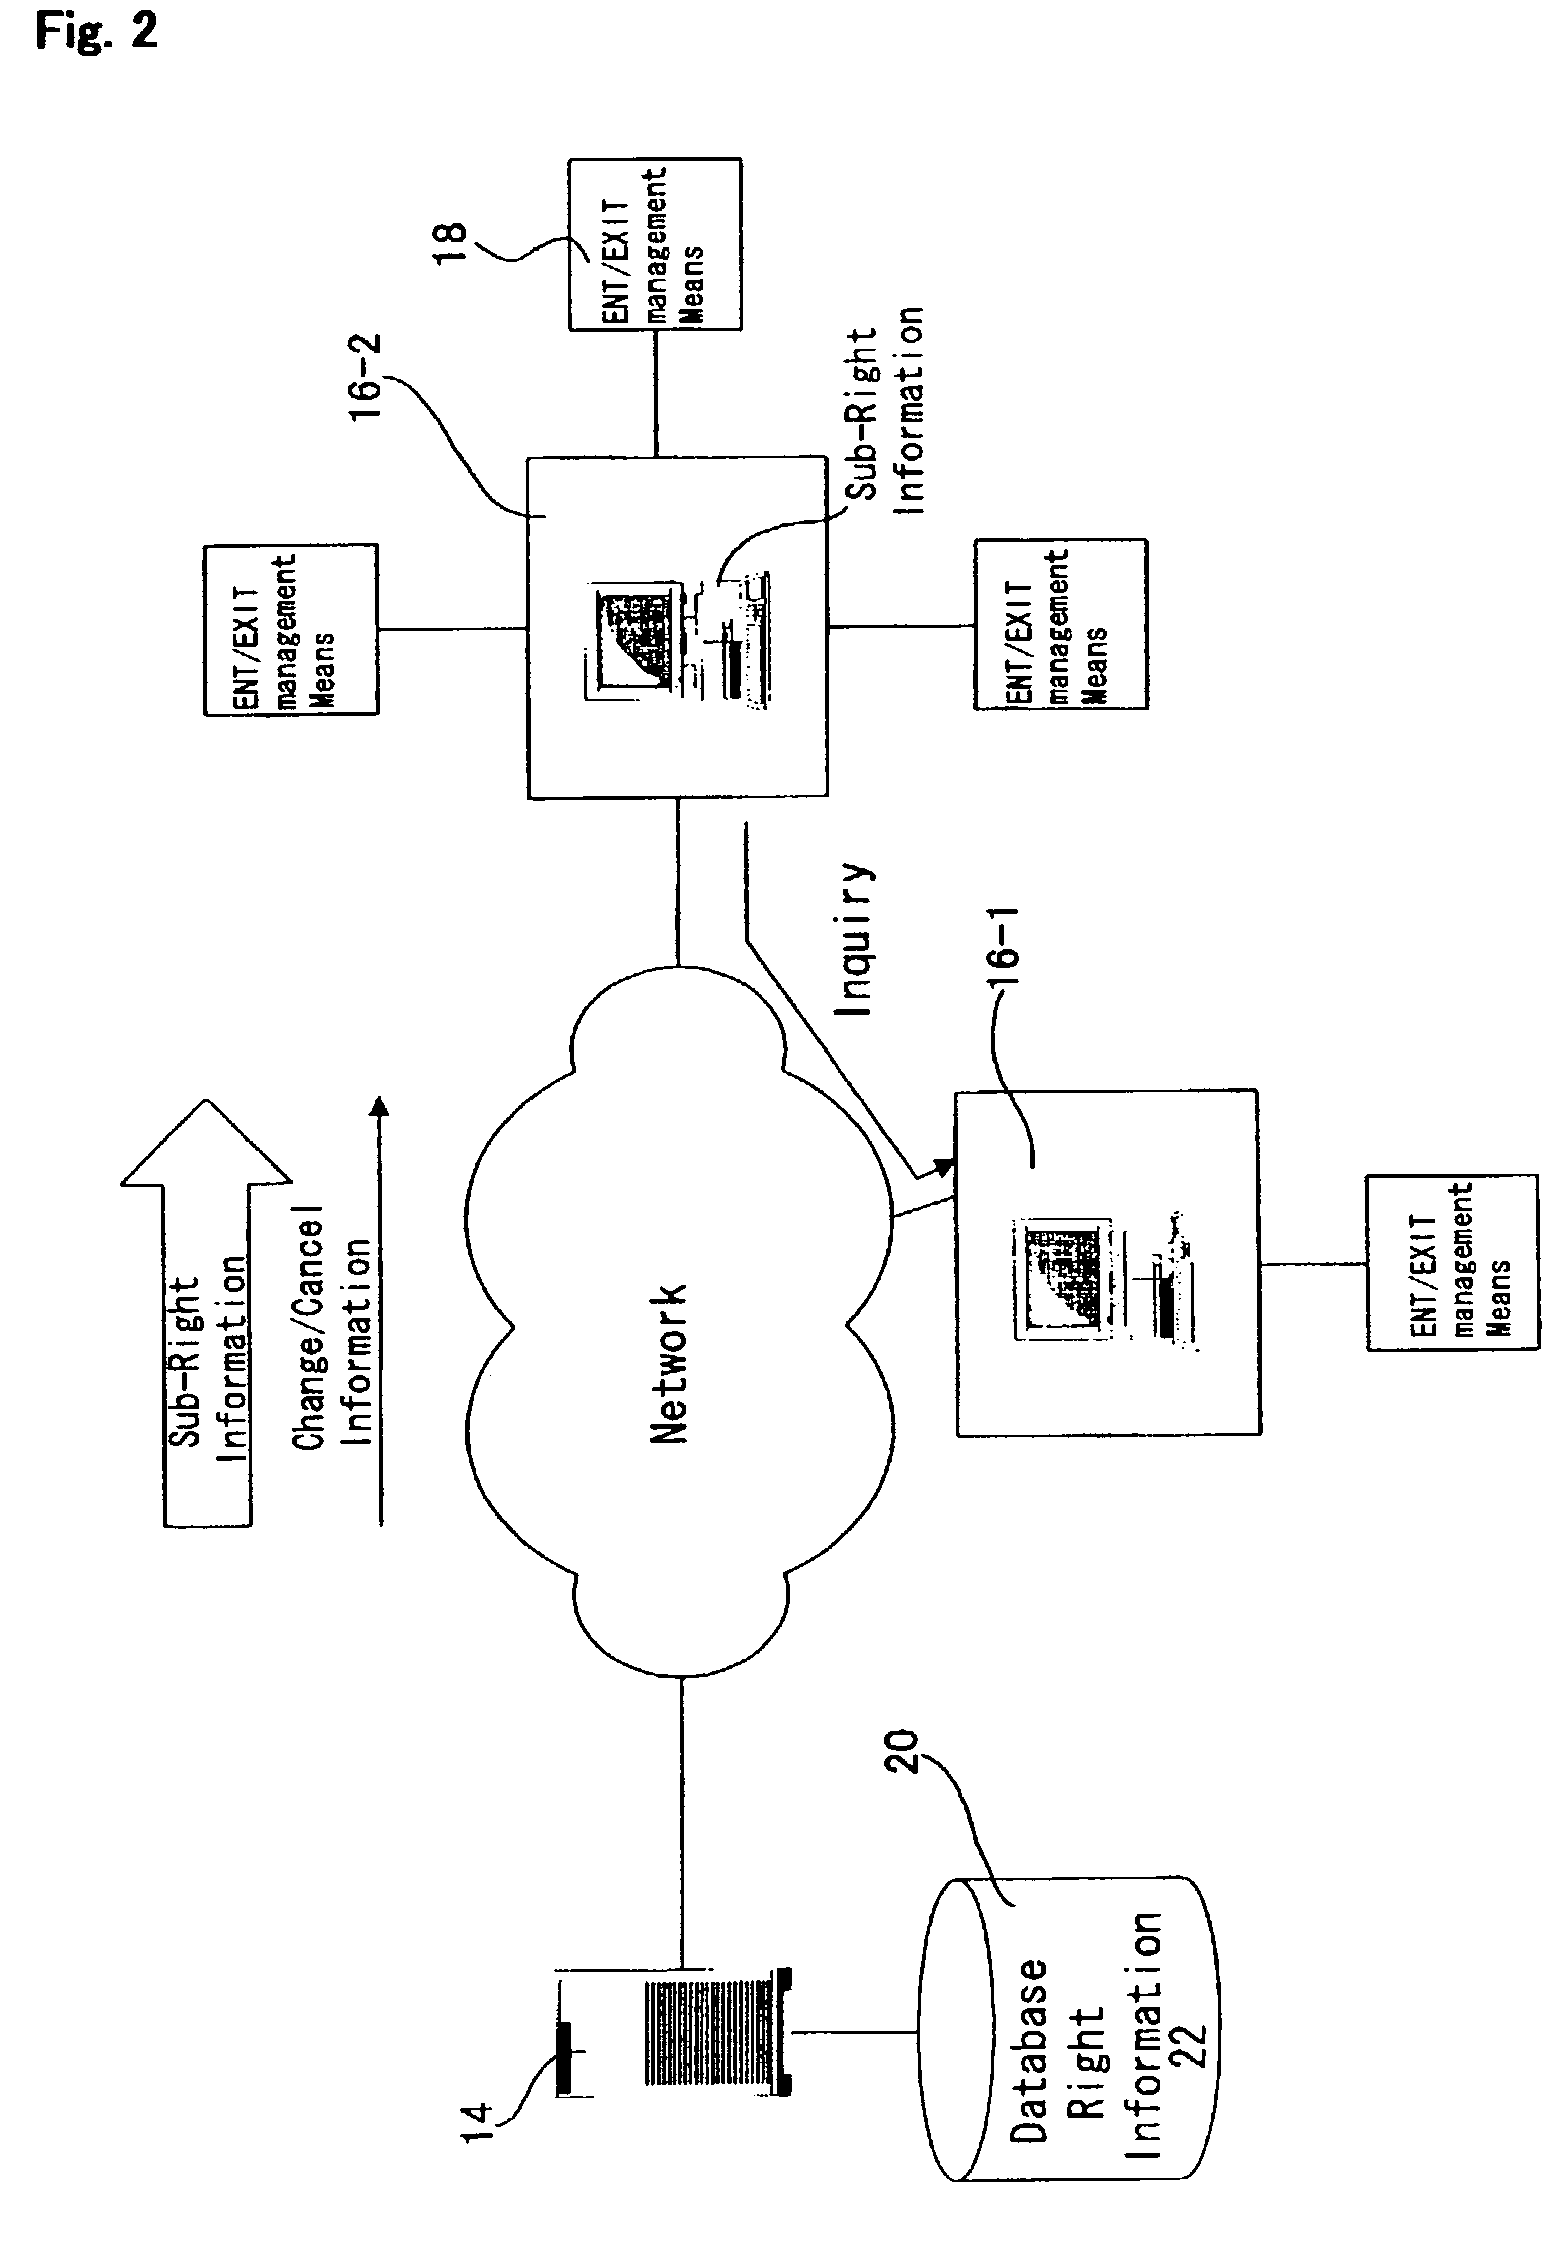 Distributed access control system